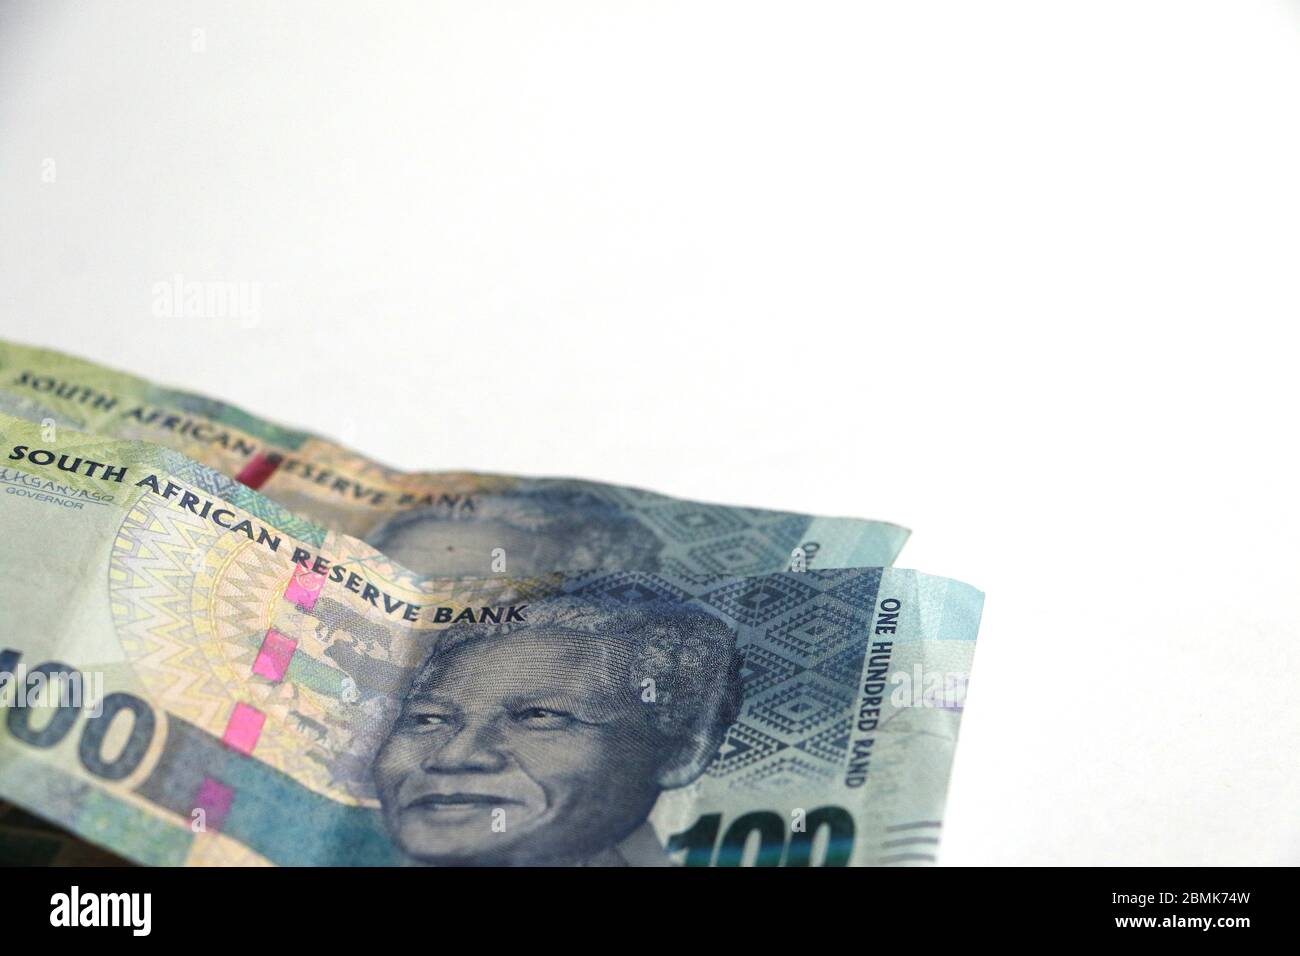 South African currency money rands notes scattered on white background Stock Photo